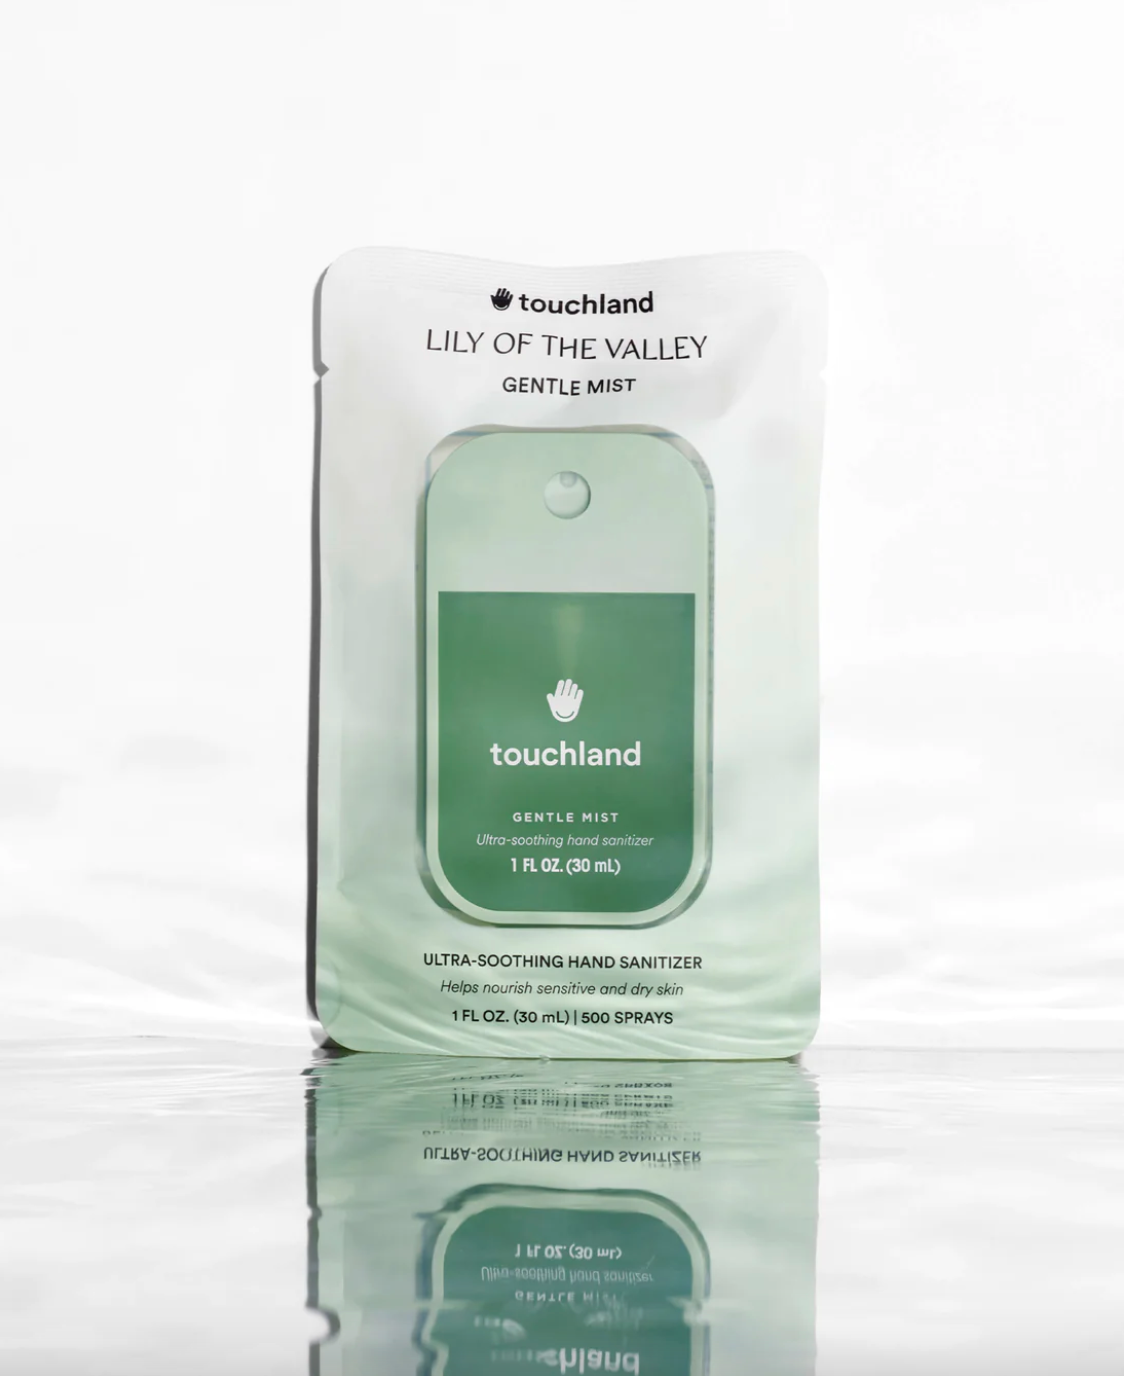 touchland gentle mist - lily of the valley